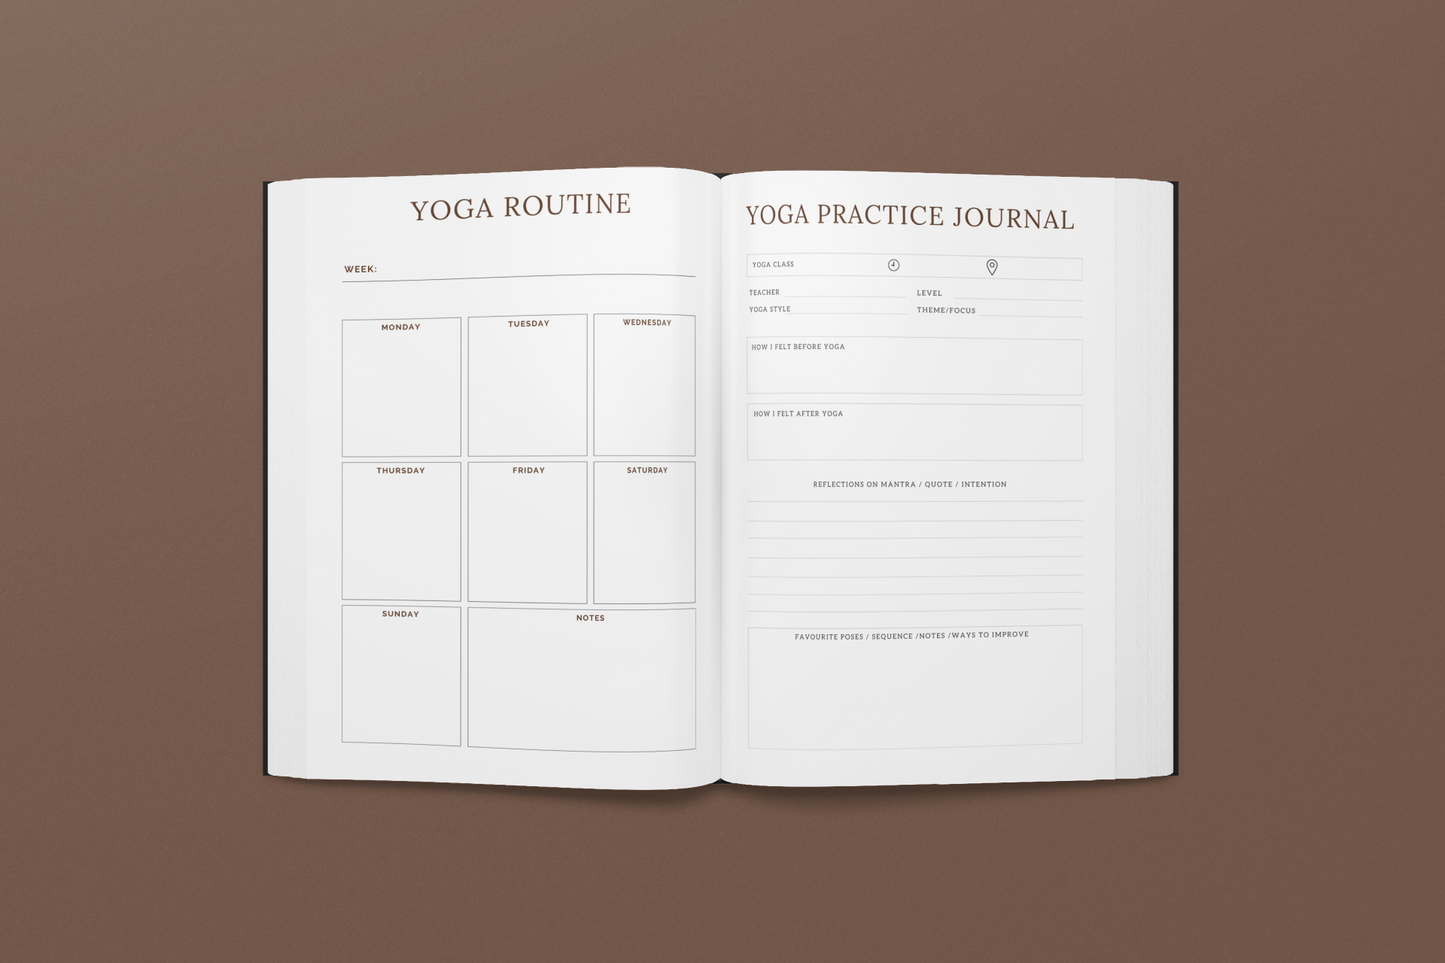 how to resell plr for yoga experts